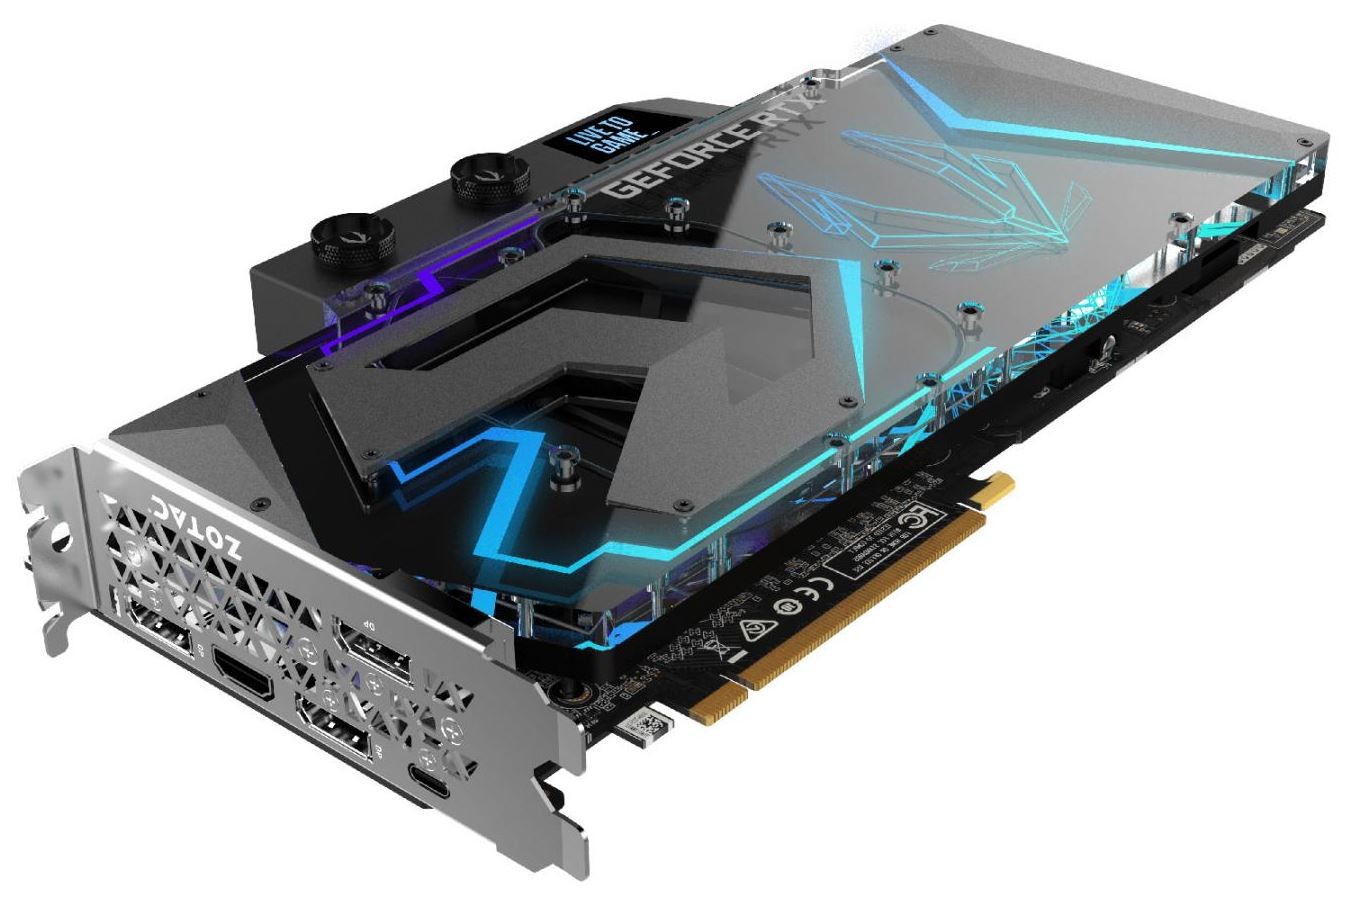 ZOTAC RTX 2080 Ti ArcticStorm Watercooled GPU to be Released – GND 